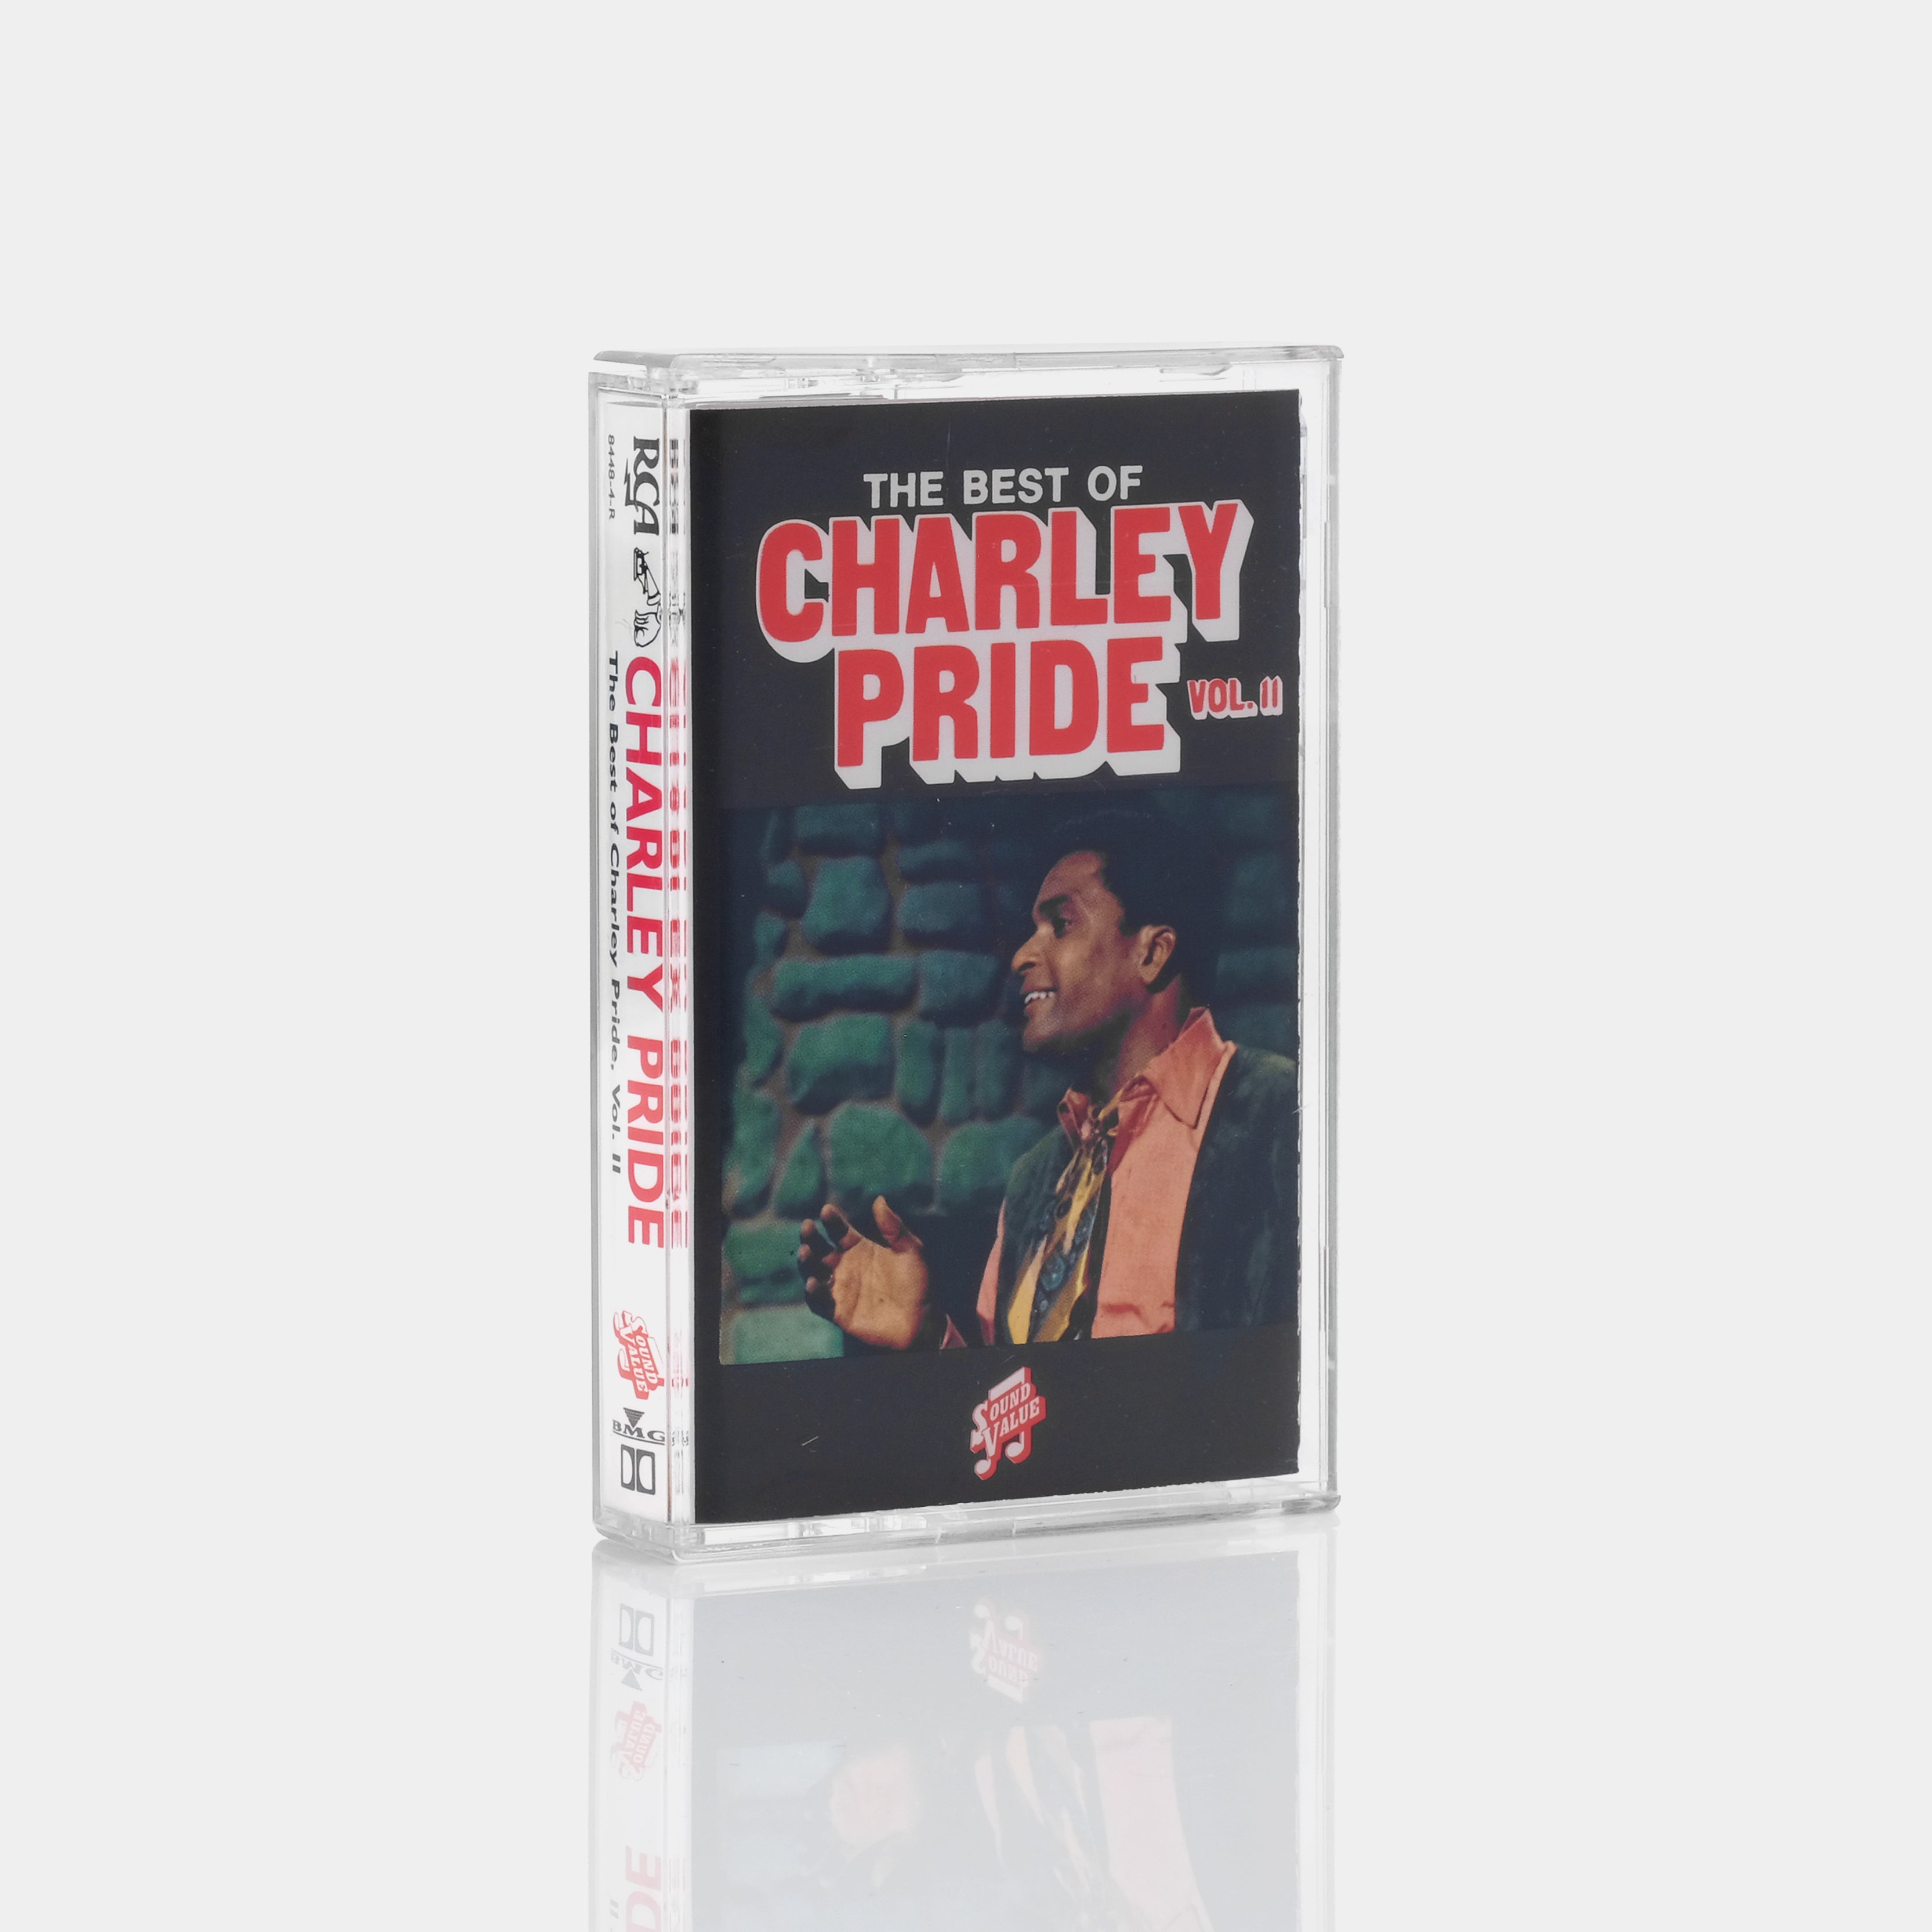 The Best Of Charley Pride Vol. II Cassette Tape